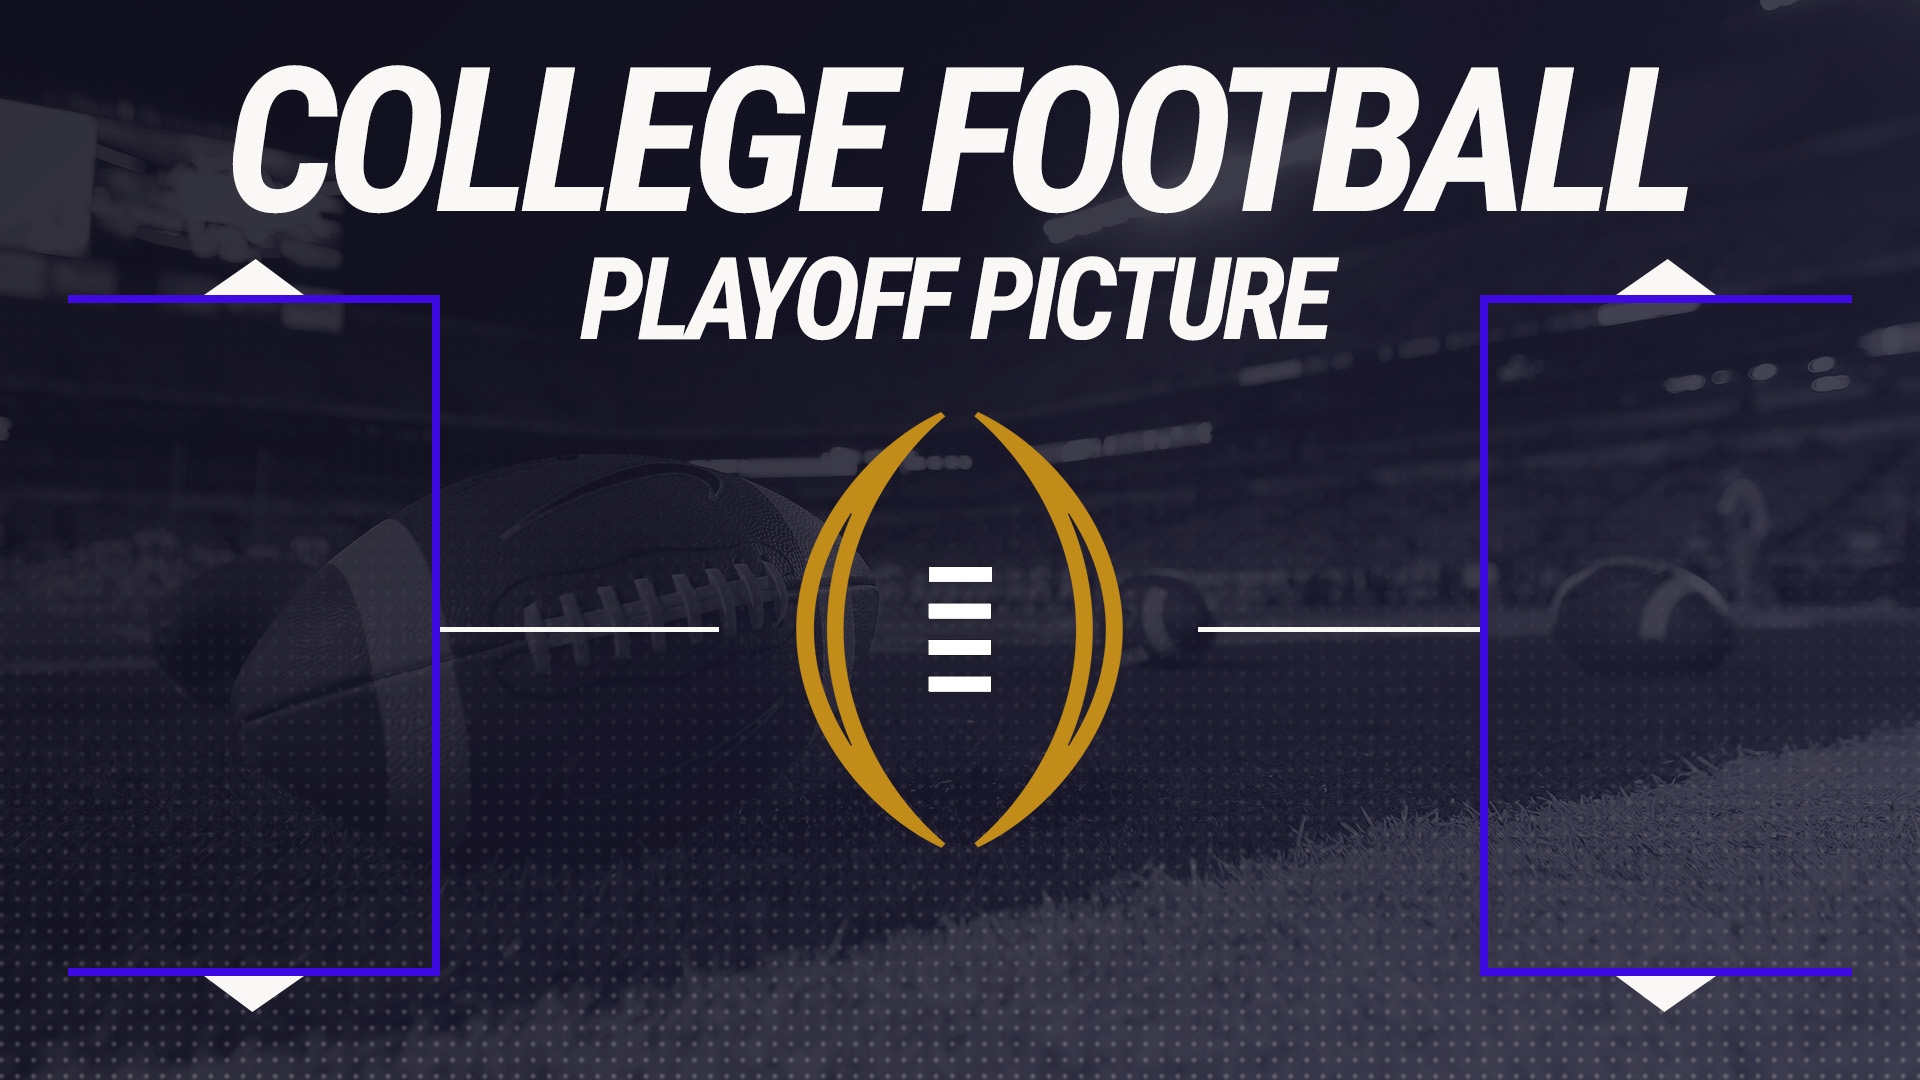 10 possible College Football Playoff combinations we'd love to see